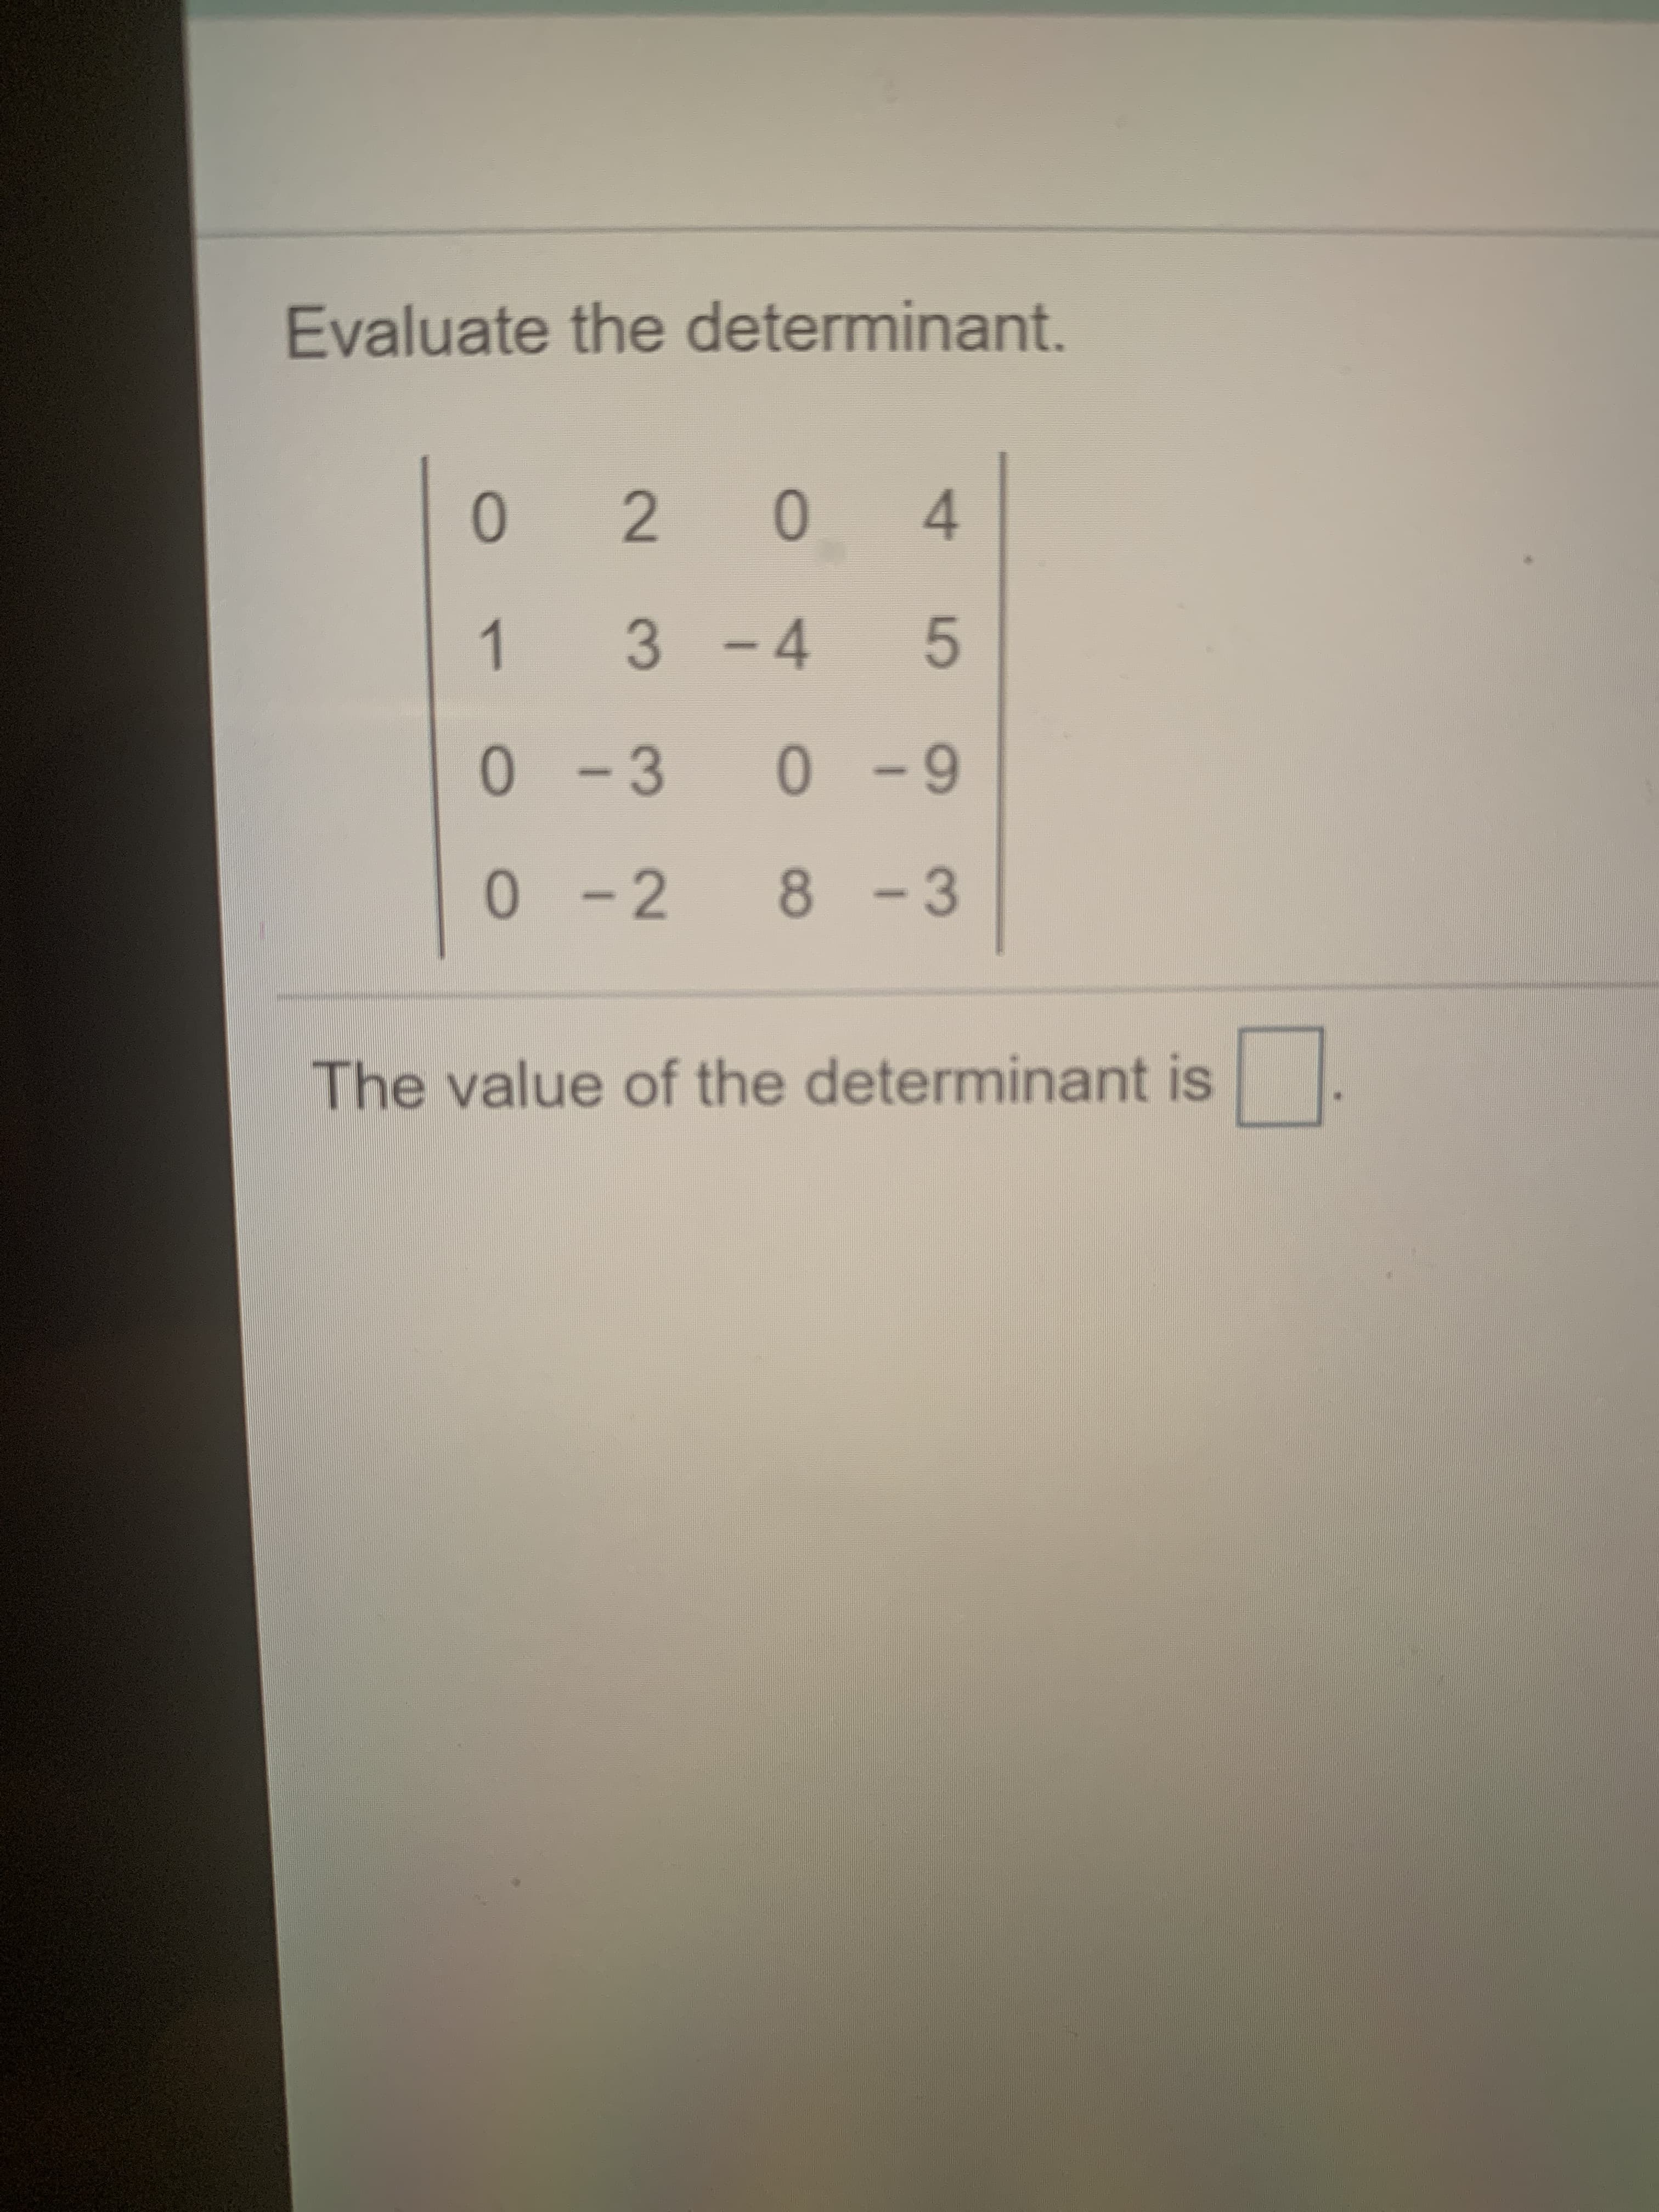 Evaluate the determinant.
0
1
3-4
5
-3
- 2
8-3
The value of the determinant is
4.
2.
